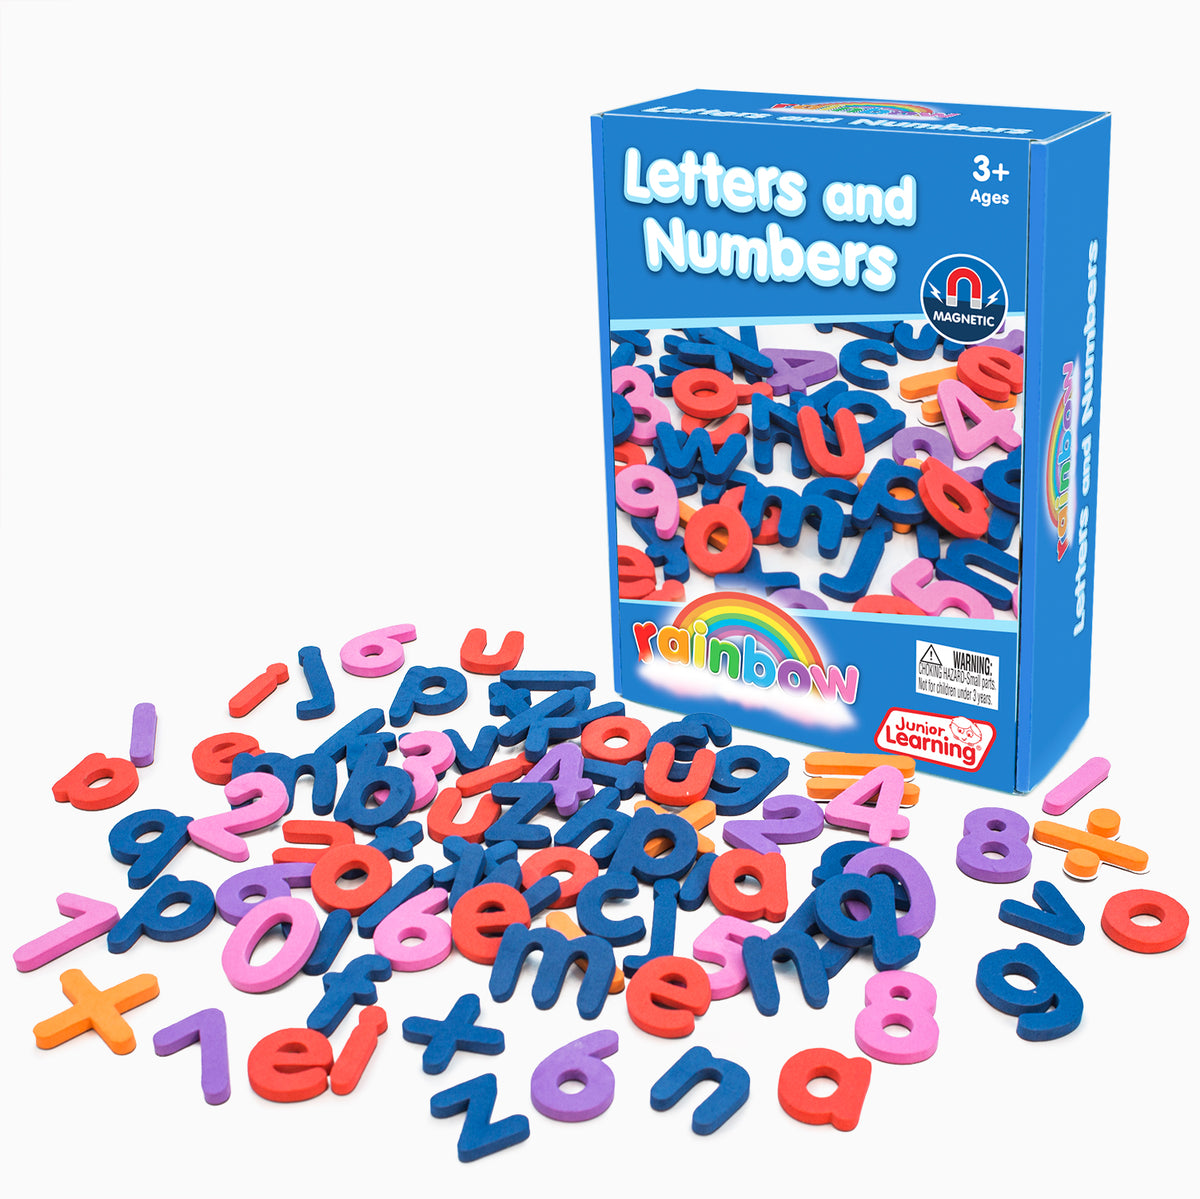 Junior Learning JL600 Rainbow Letters and Numbers box and pieces